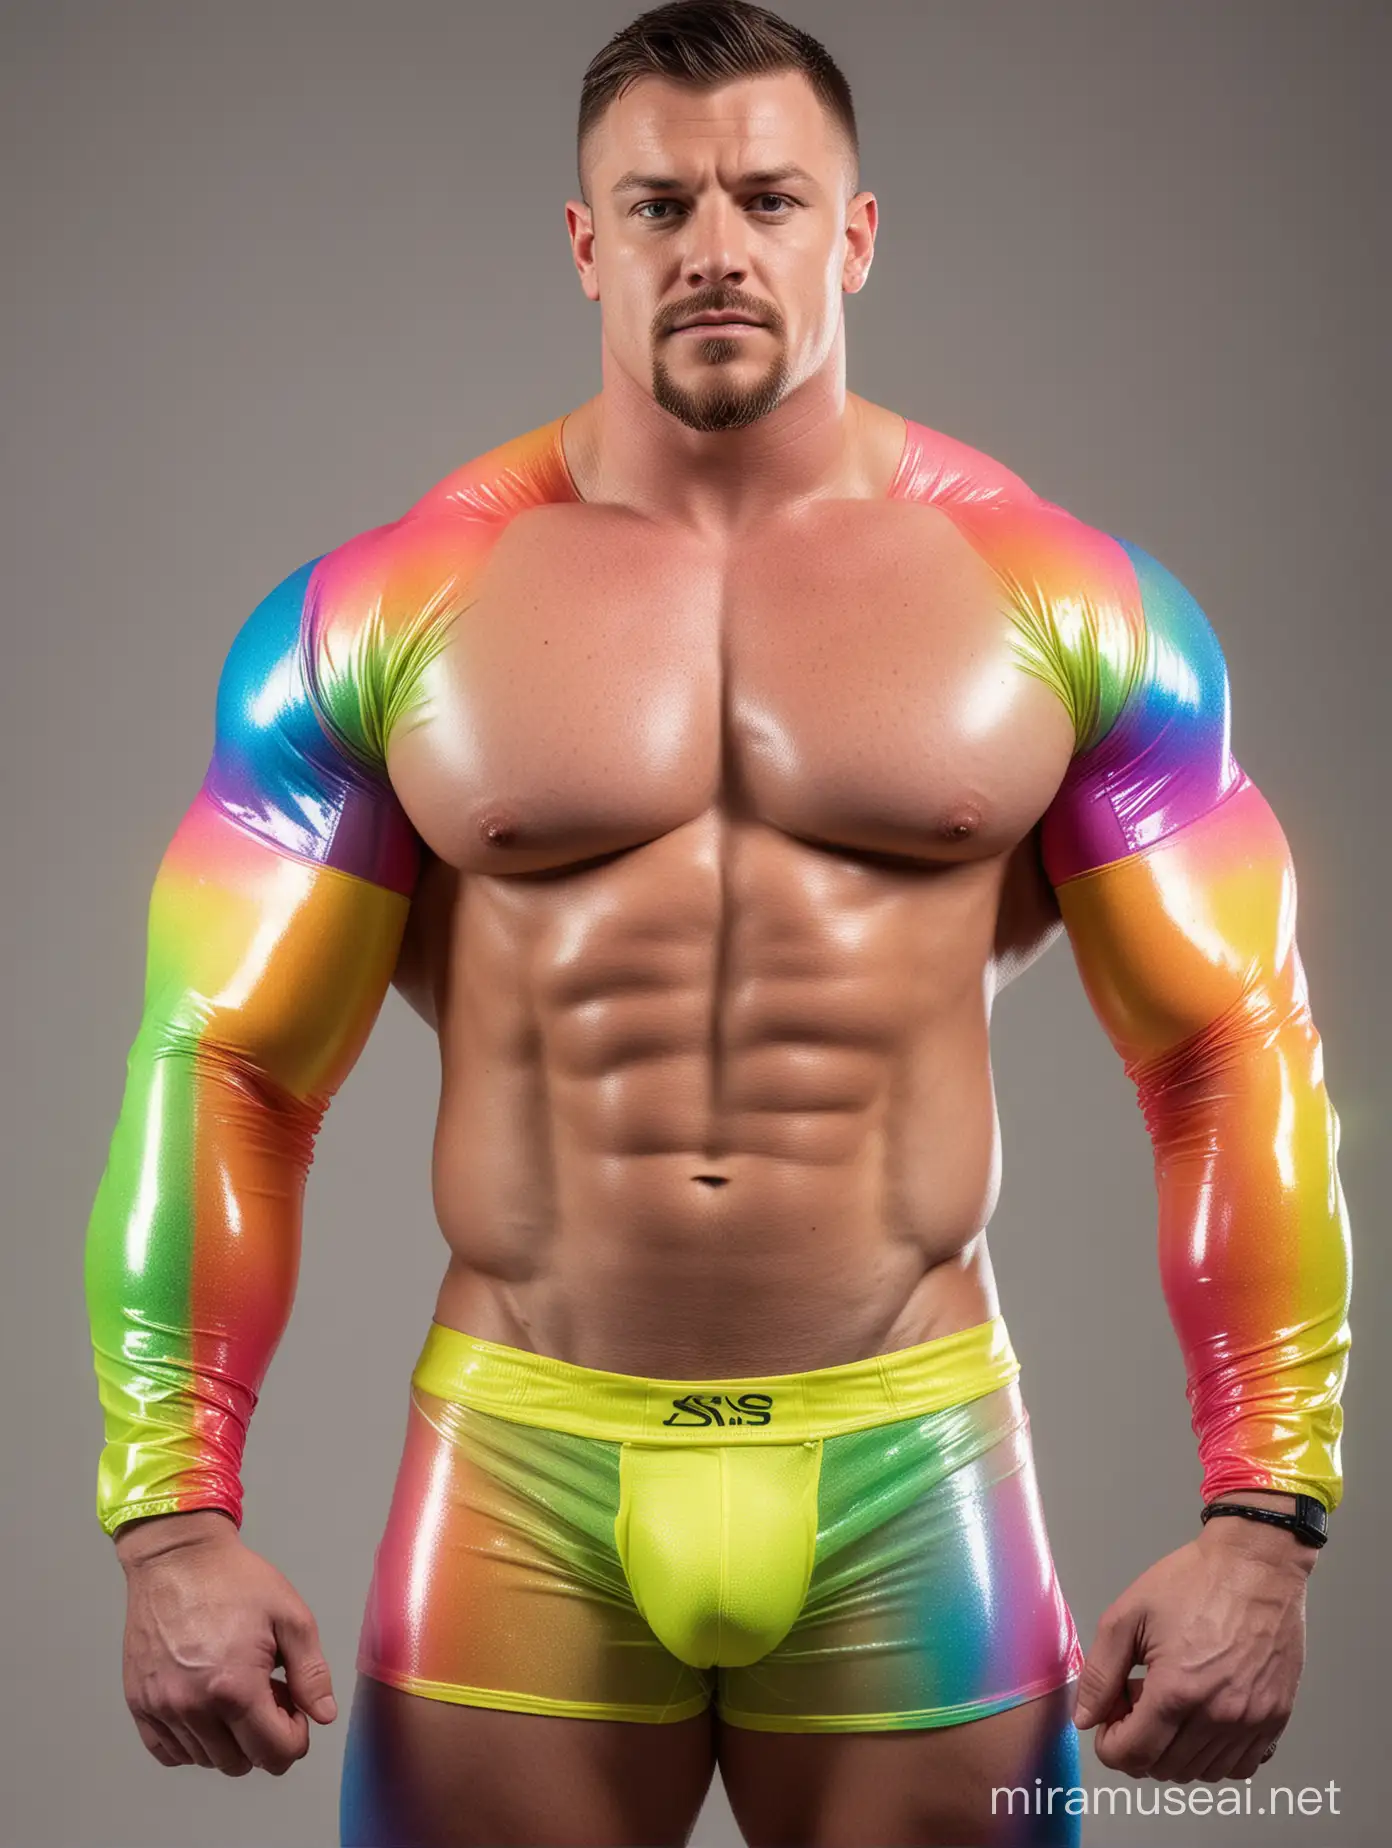 Close Up Full View of Topless 30s Ultra Muscular World's Strongest Man holding Huge Bright Rainbow Coloured Heavy Weights wearing Multi-Highlighter Bright Coloured See Through Jacket and Flexing Big Strong Arm